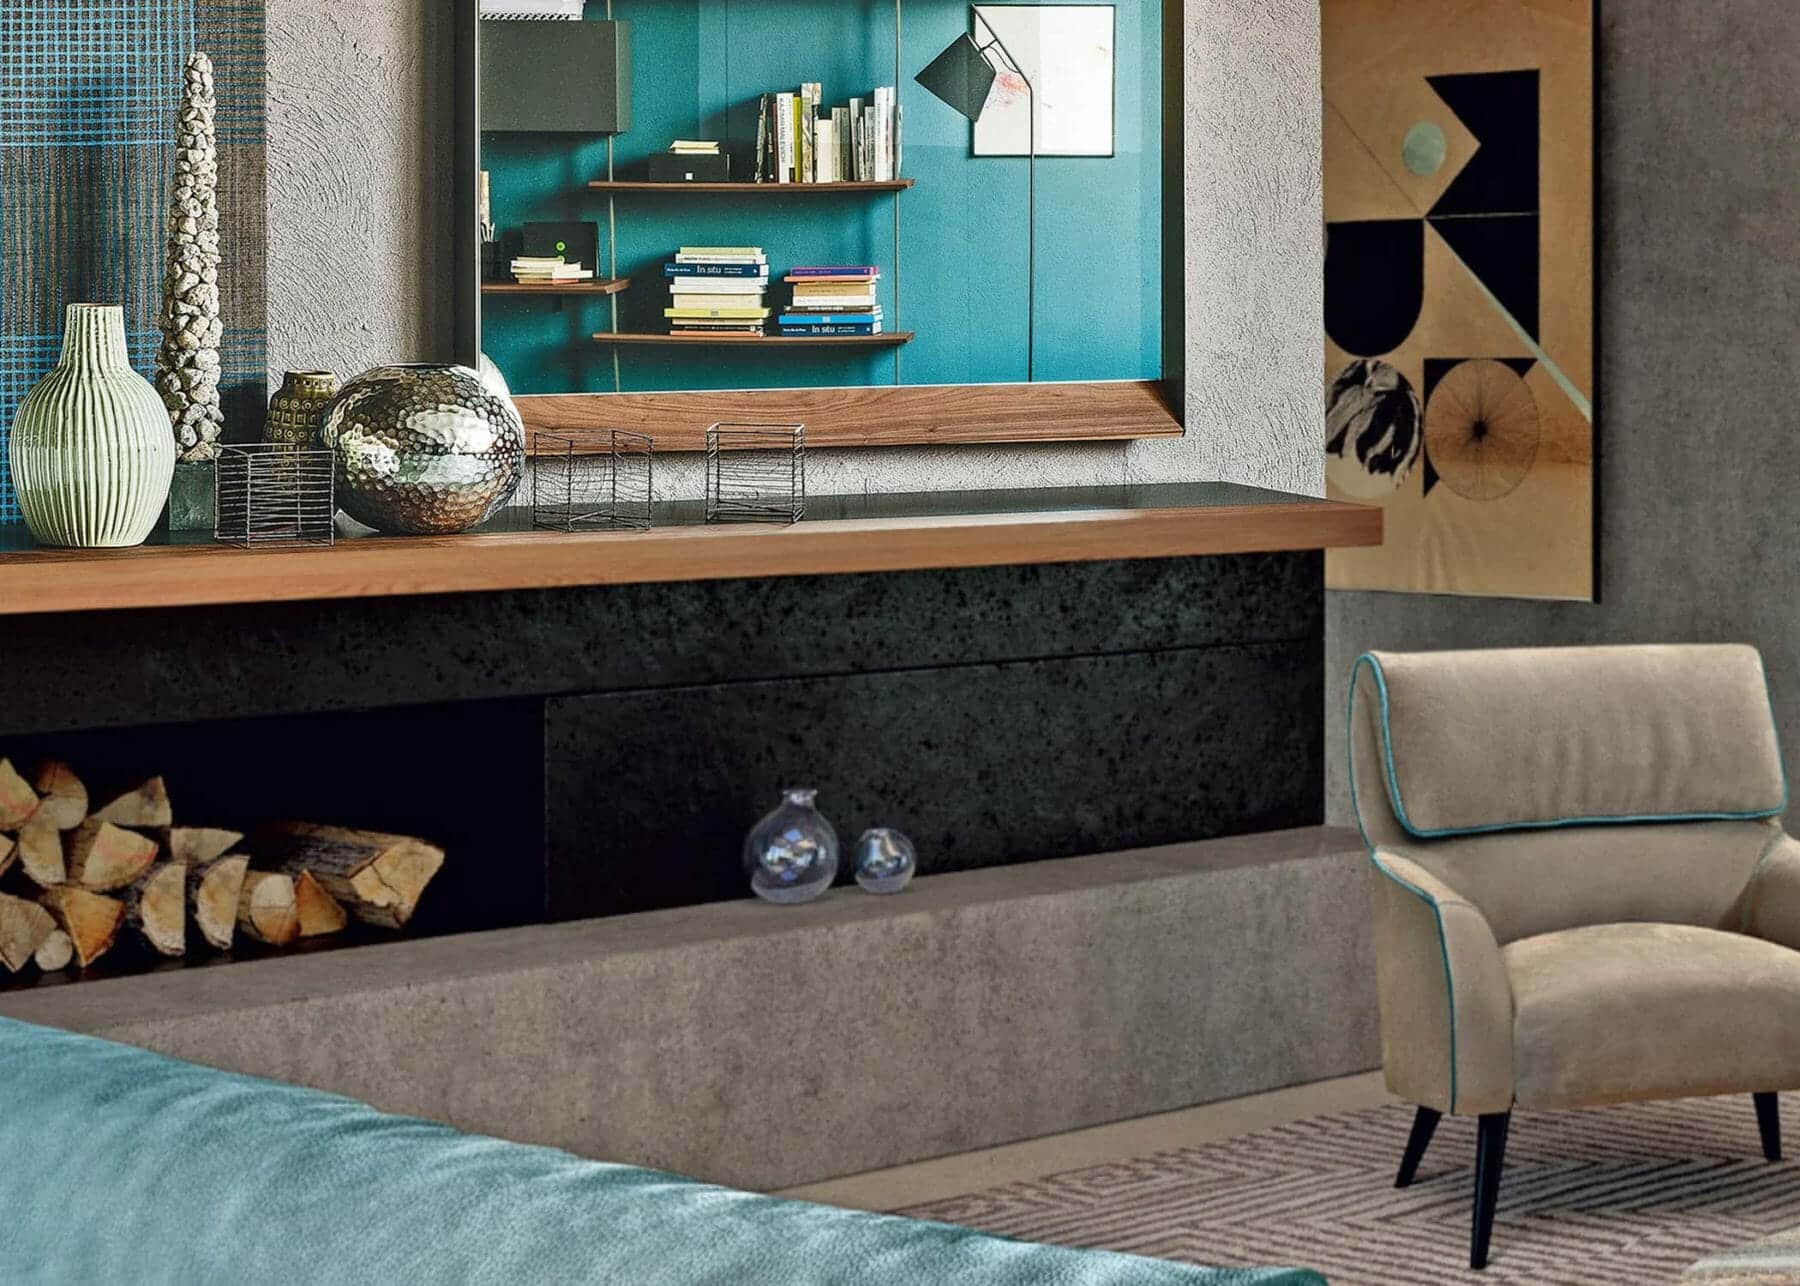 Create a Focal Point with Levels of Shelving | Contemporary & Modern Interior Design Tips from San Francisco Design